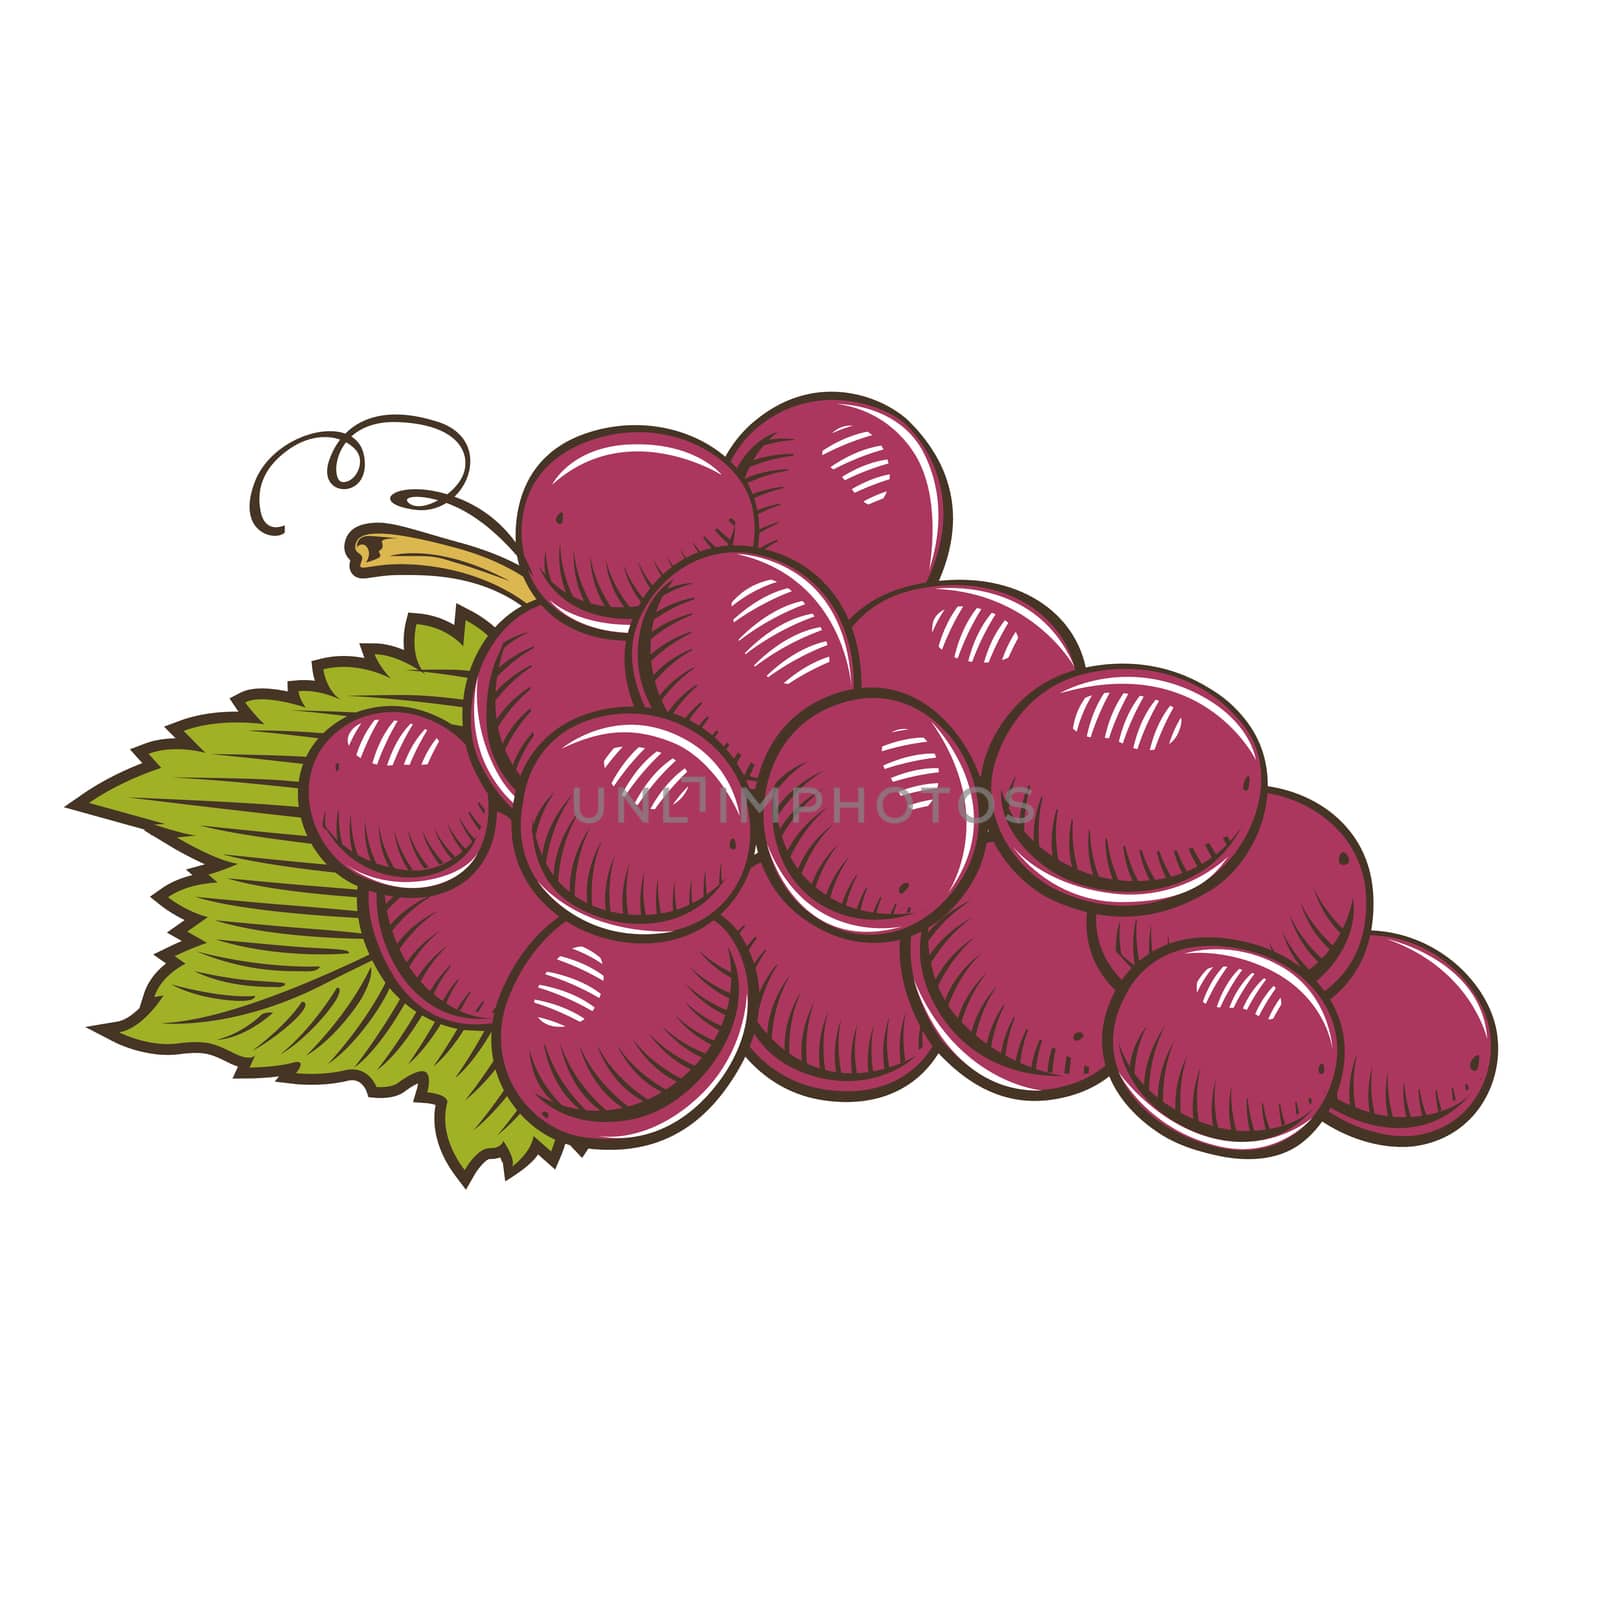 Grapes in vintage style by ConceptCafe